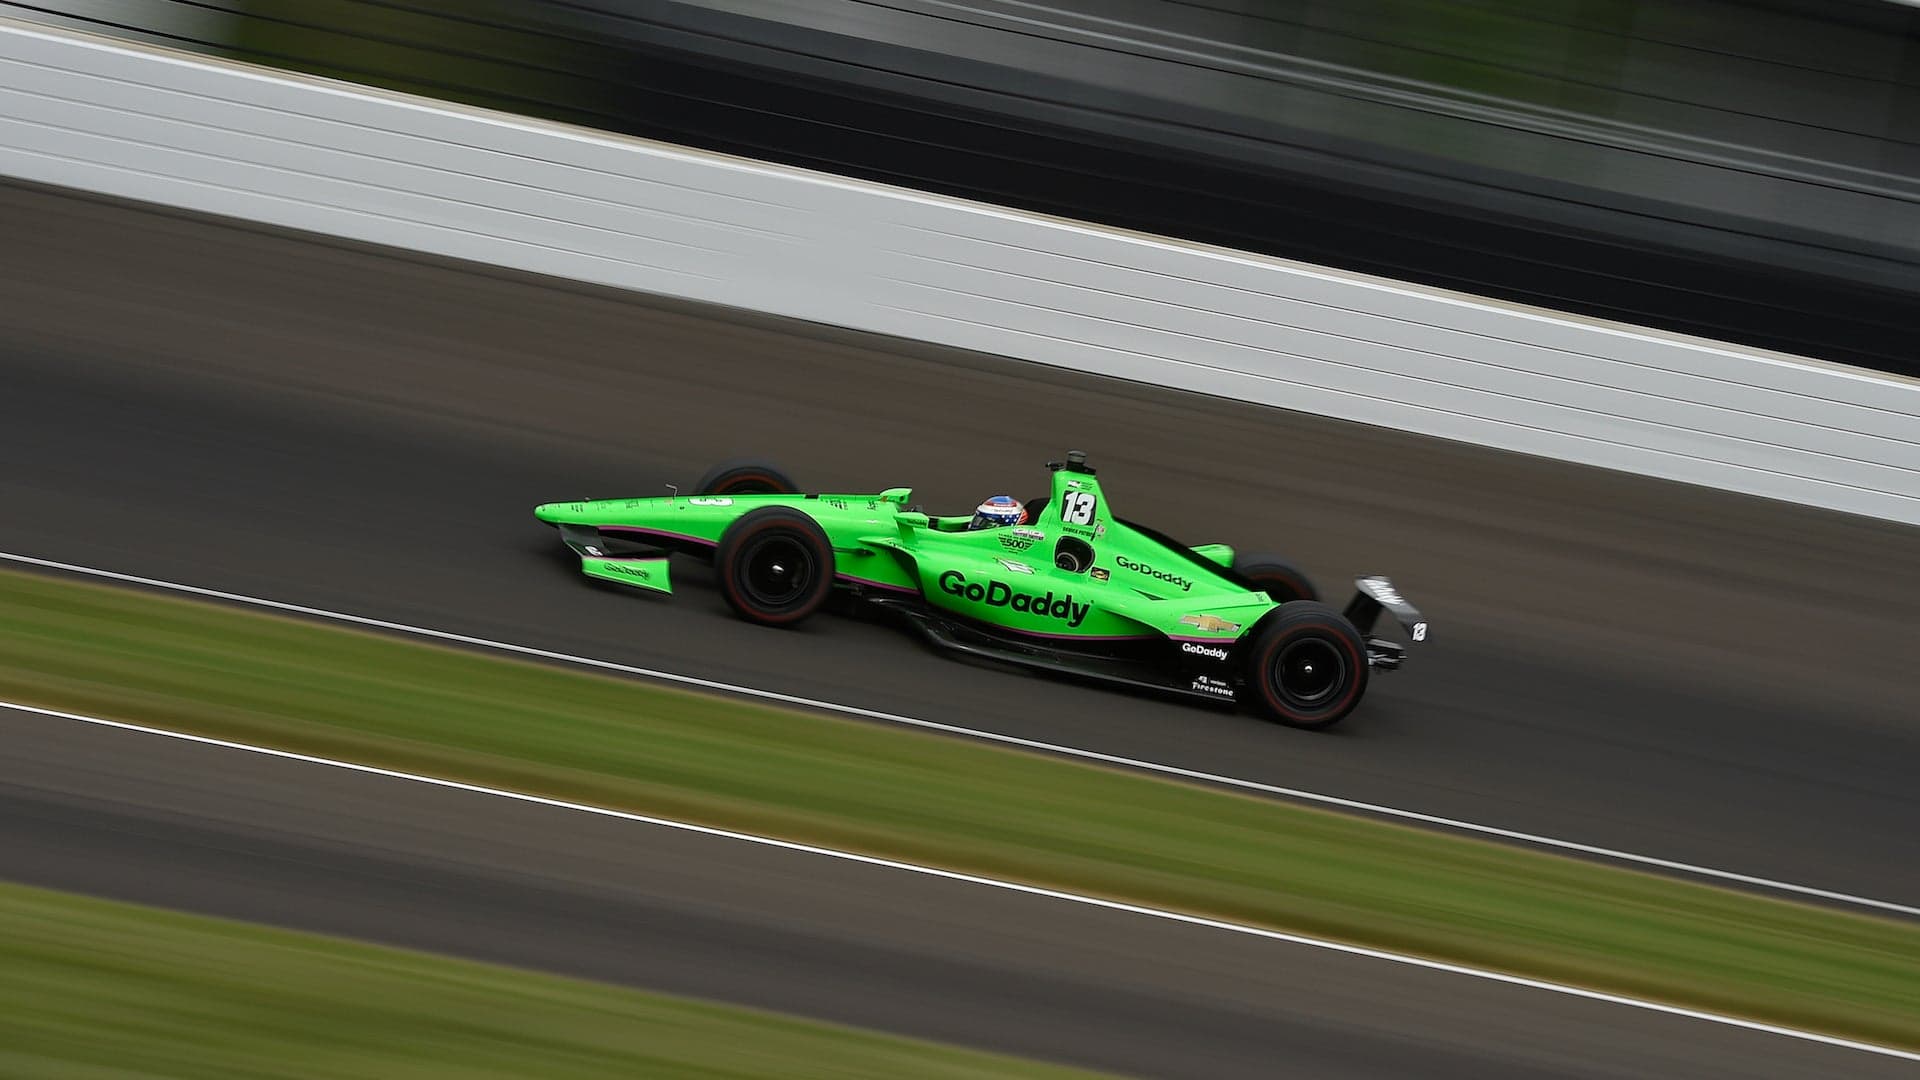 Chevrolet Sneaks Past Honda During Final Practice for Sunday’s Indy 500